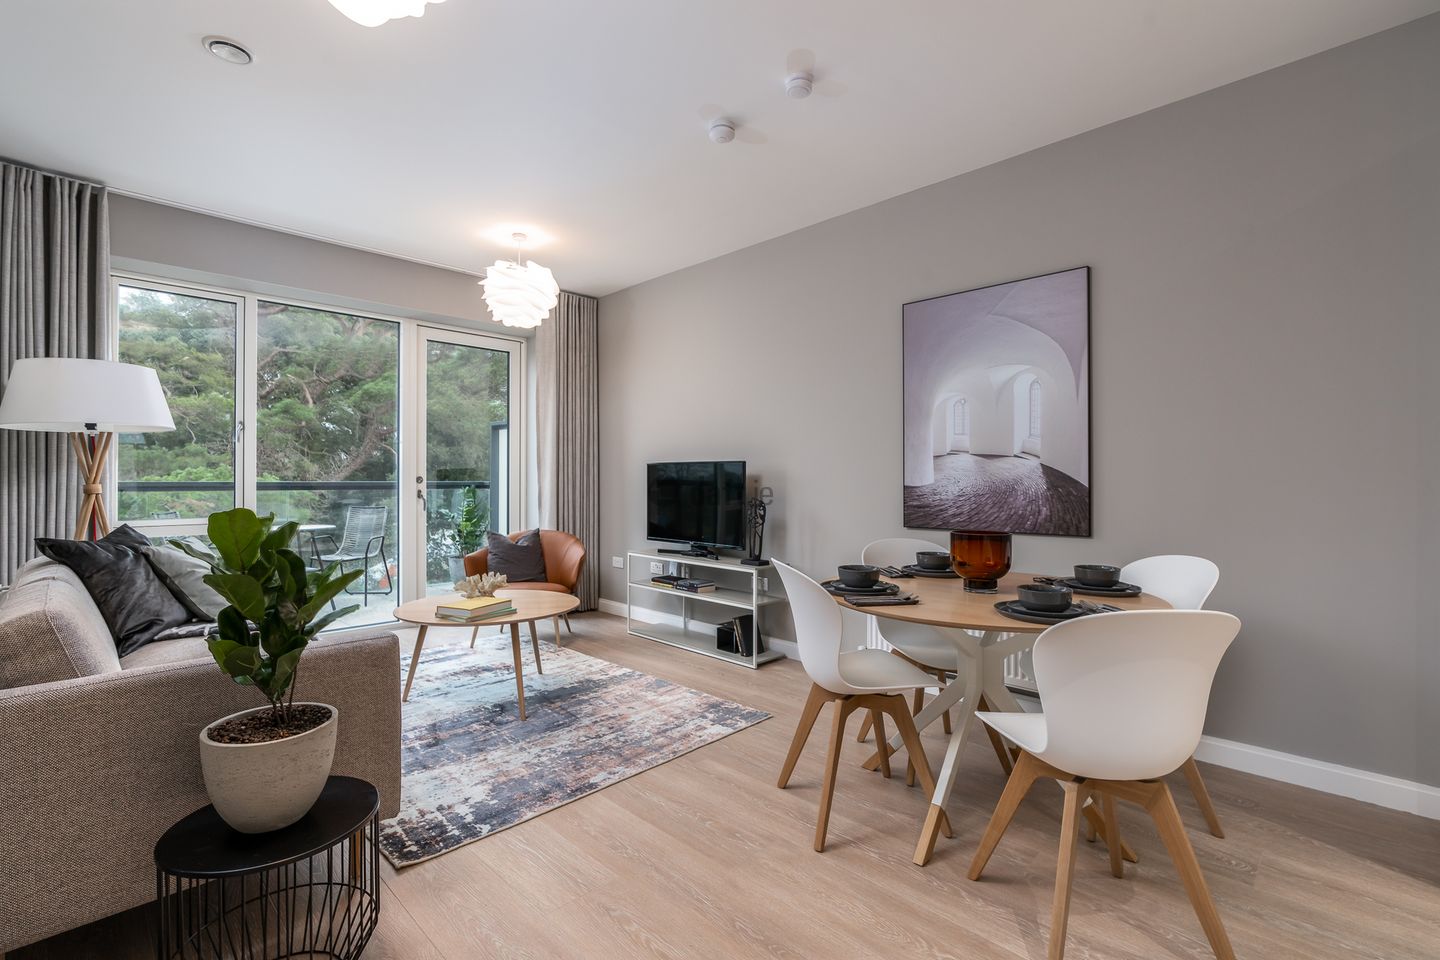 1 Bed , Woodward Square, Woodward Square , Glencairn , Leopardstown, Dublin 18